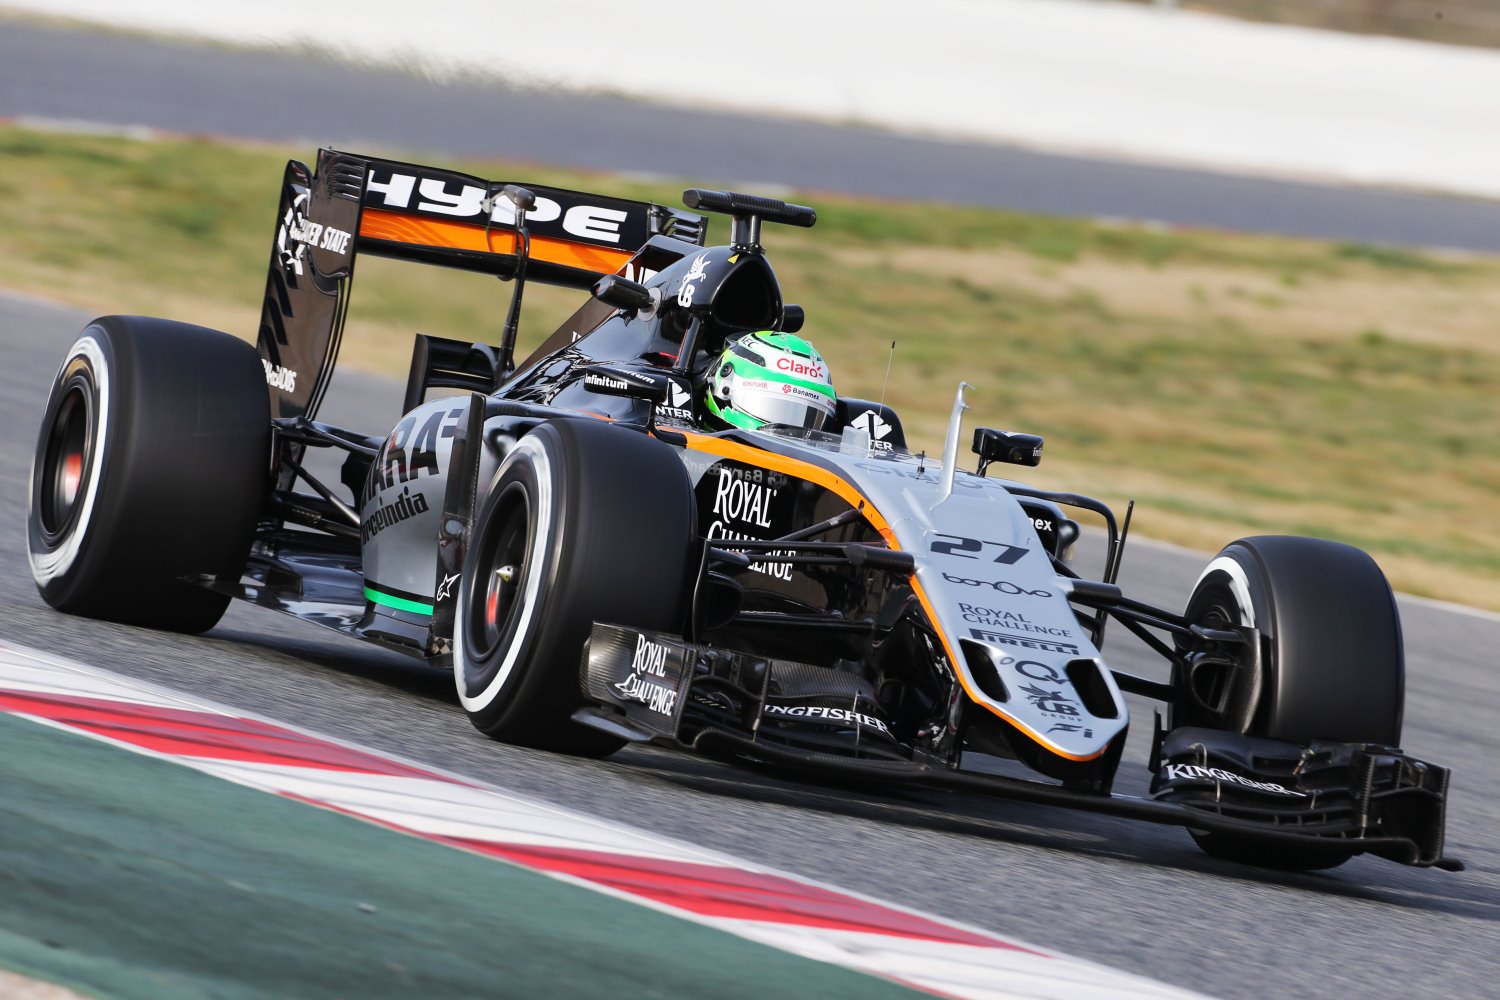 Hulkenberg too over for Perez Wednesday in the Force India